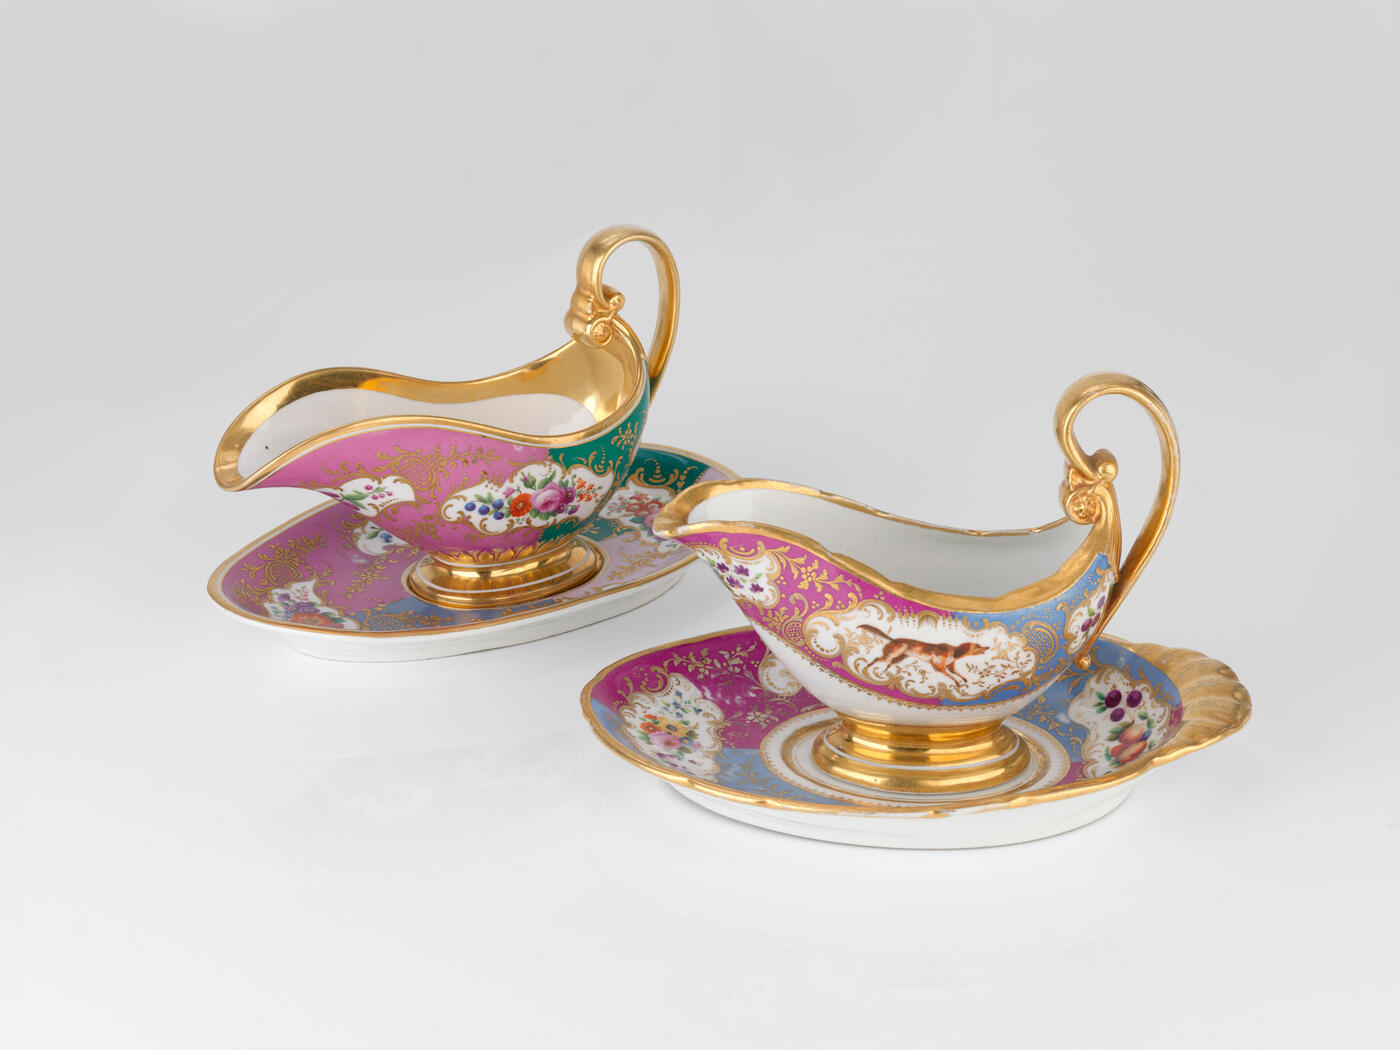 A Pair of Sauce Boats from the Grand Duke Mikhail Pavlovich Service